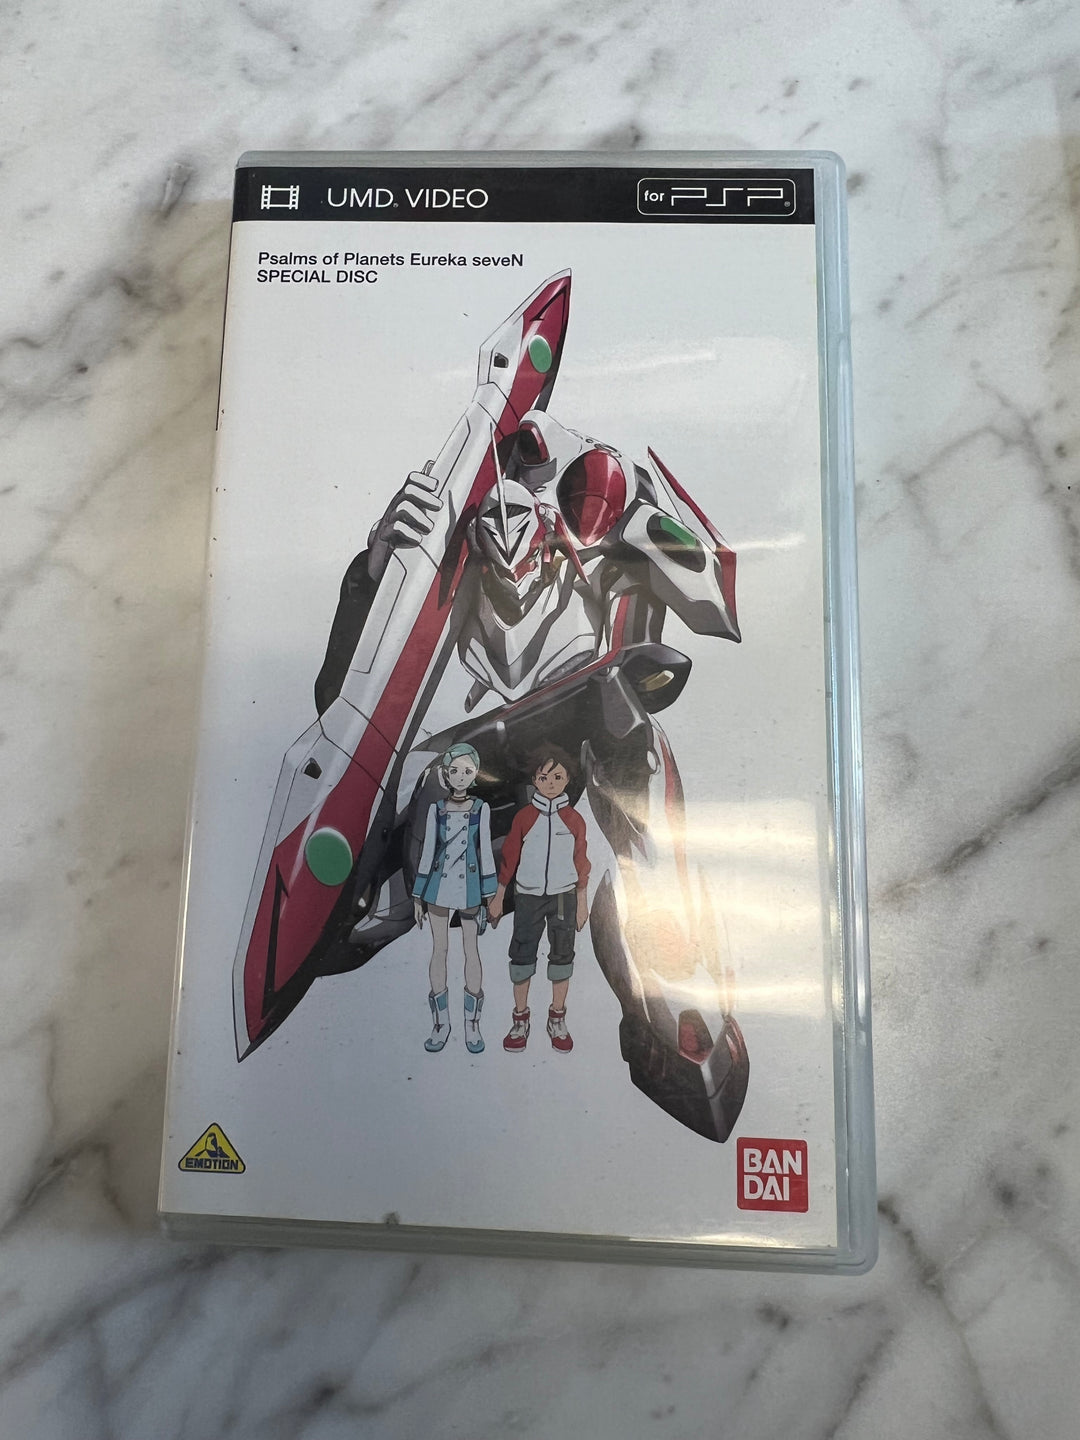 Psalms of Planets Eureka Seven Special Disc PSP UMD Movie